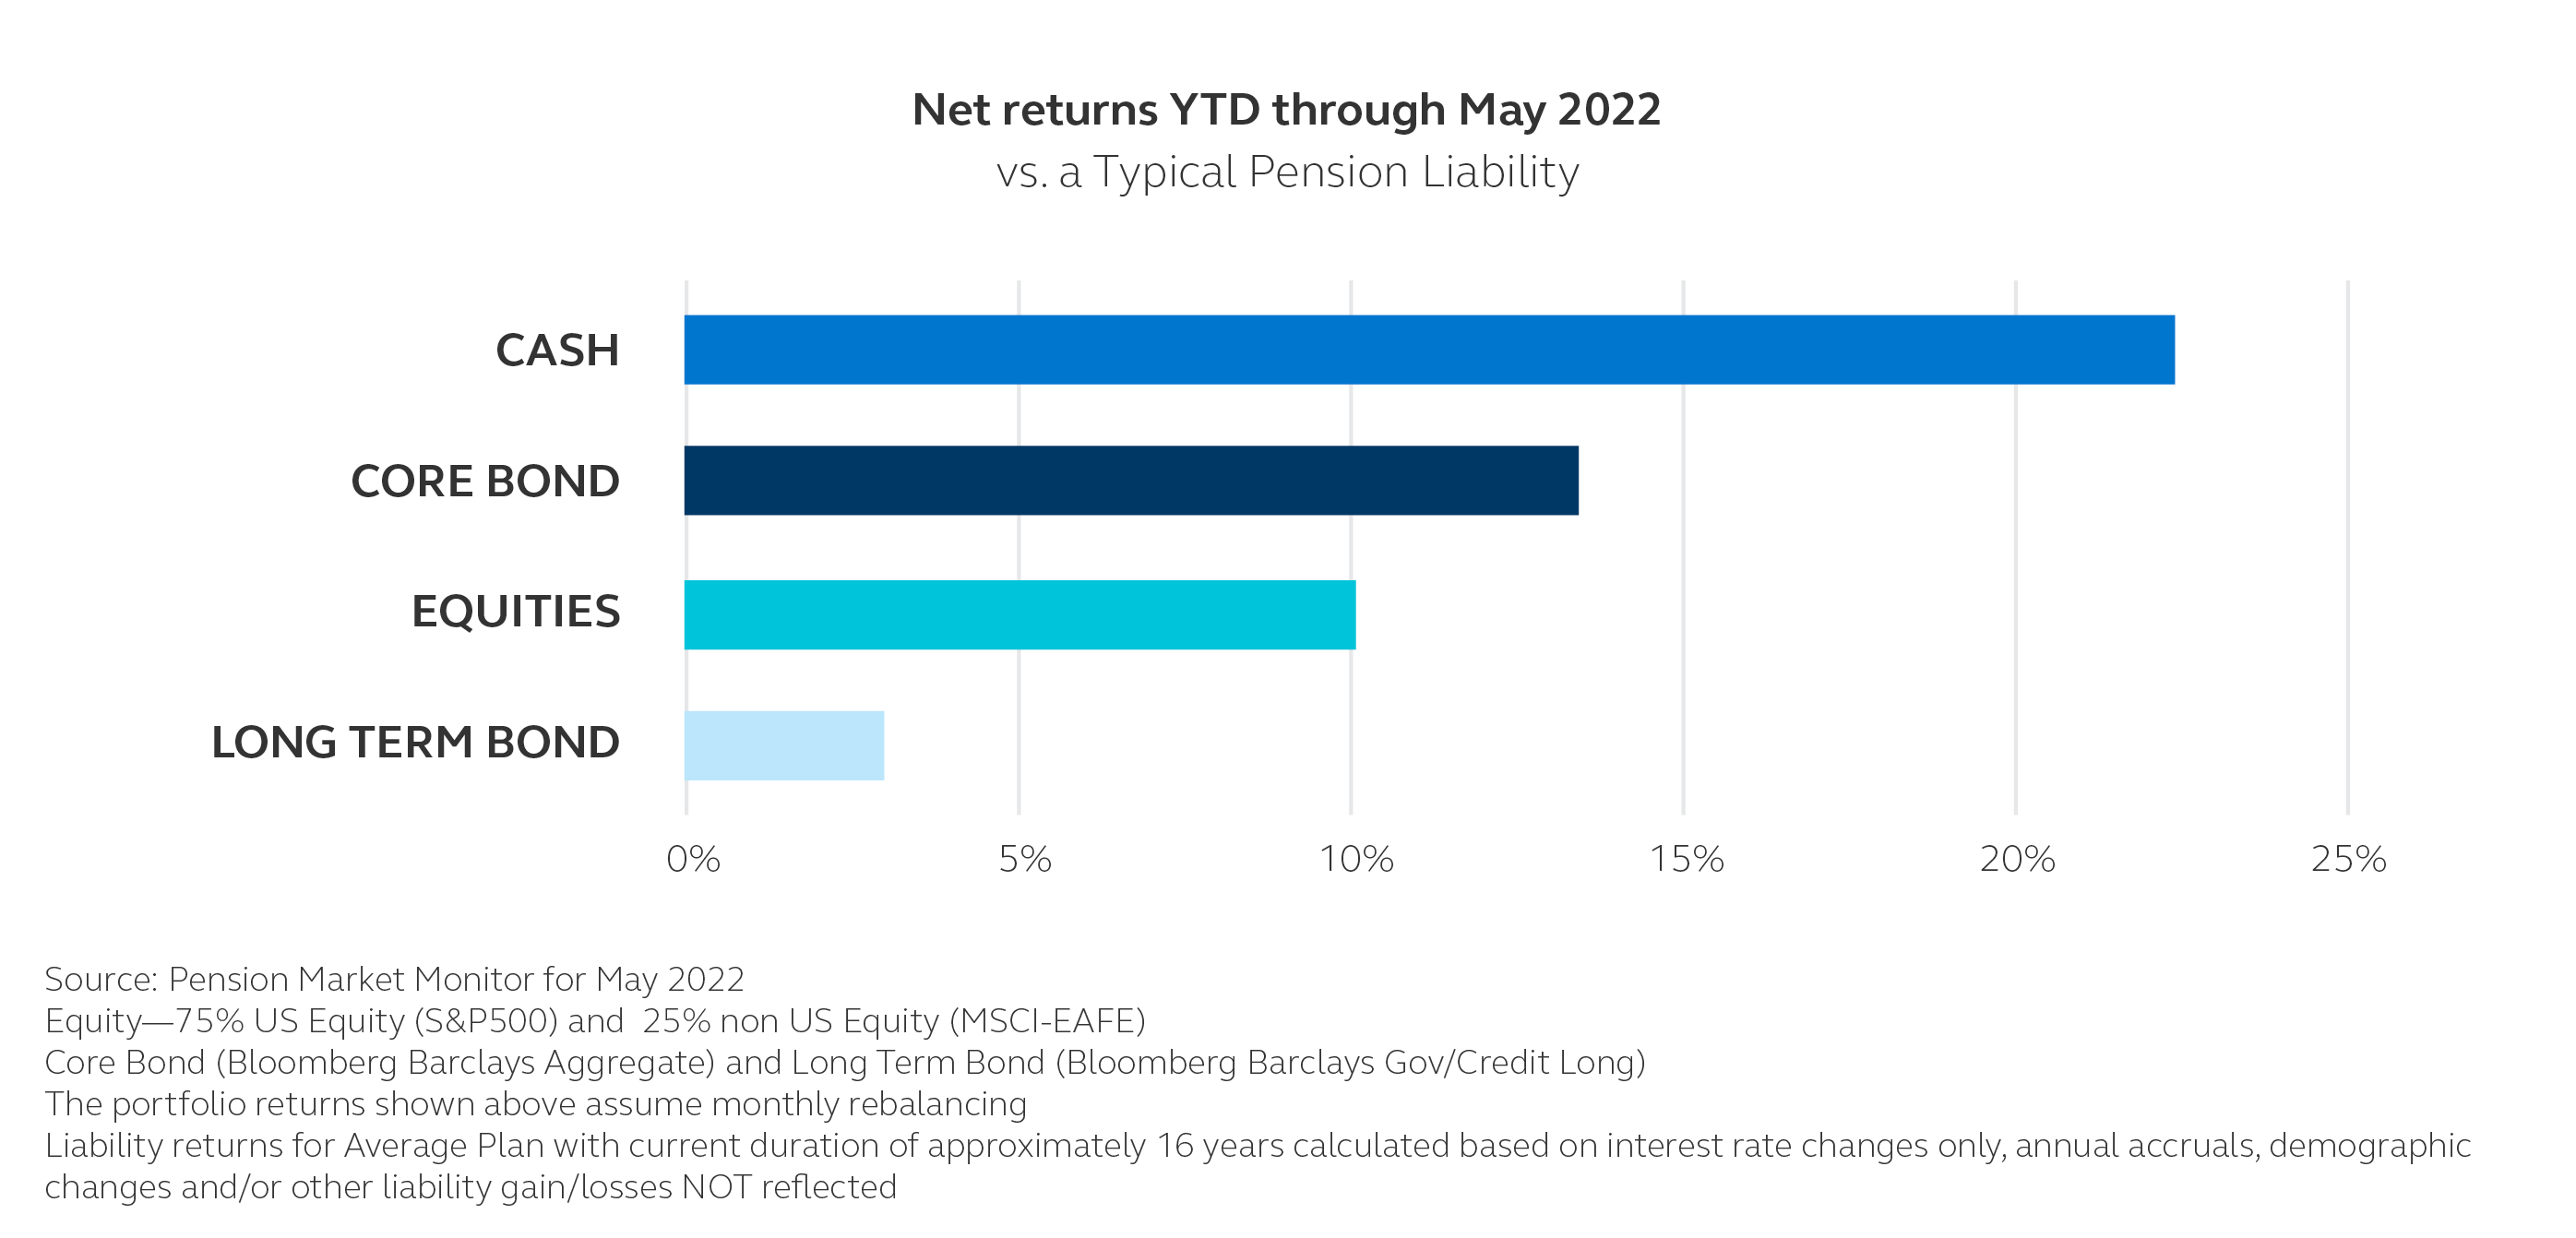 Graphic showing year-to-date net returns through May 2022 were about 22% for cash, 13% for core bonds, 10% for equities, and 3% for long term bonds